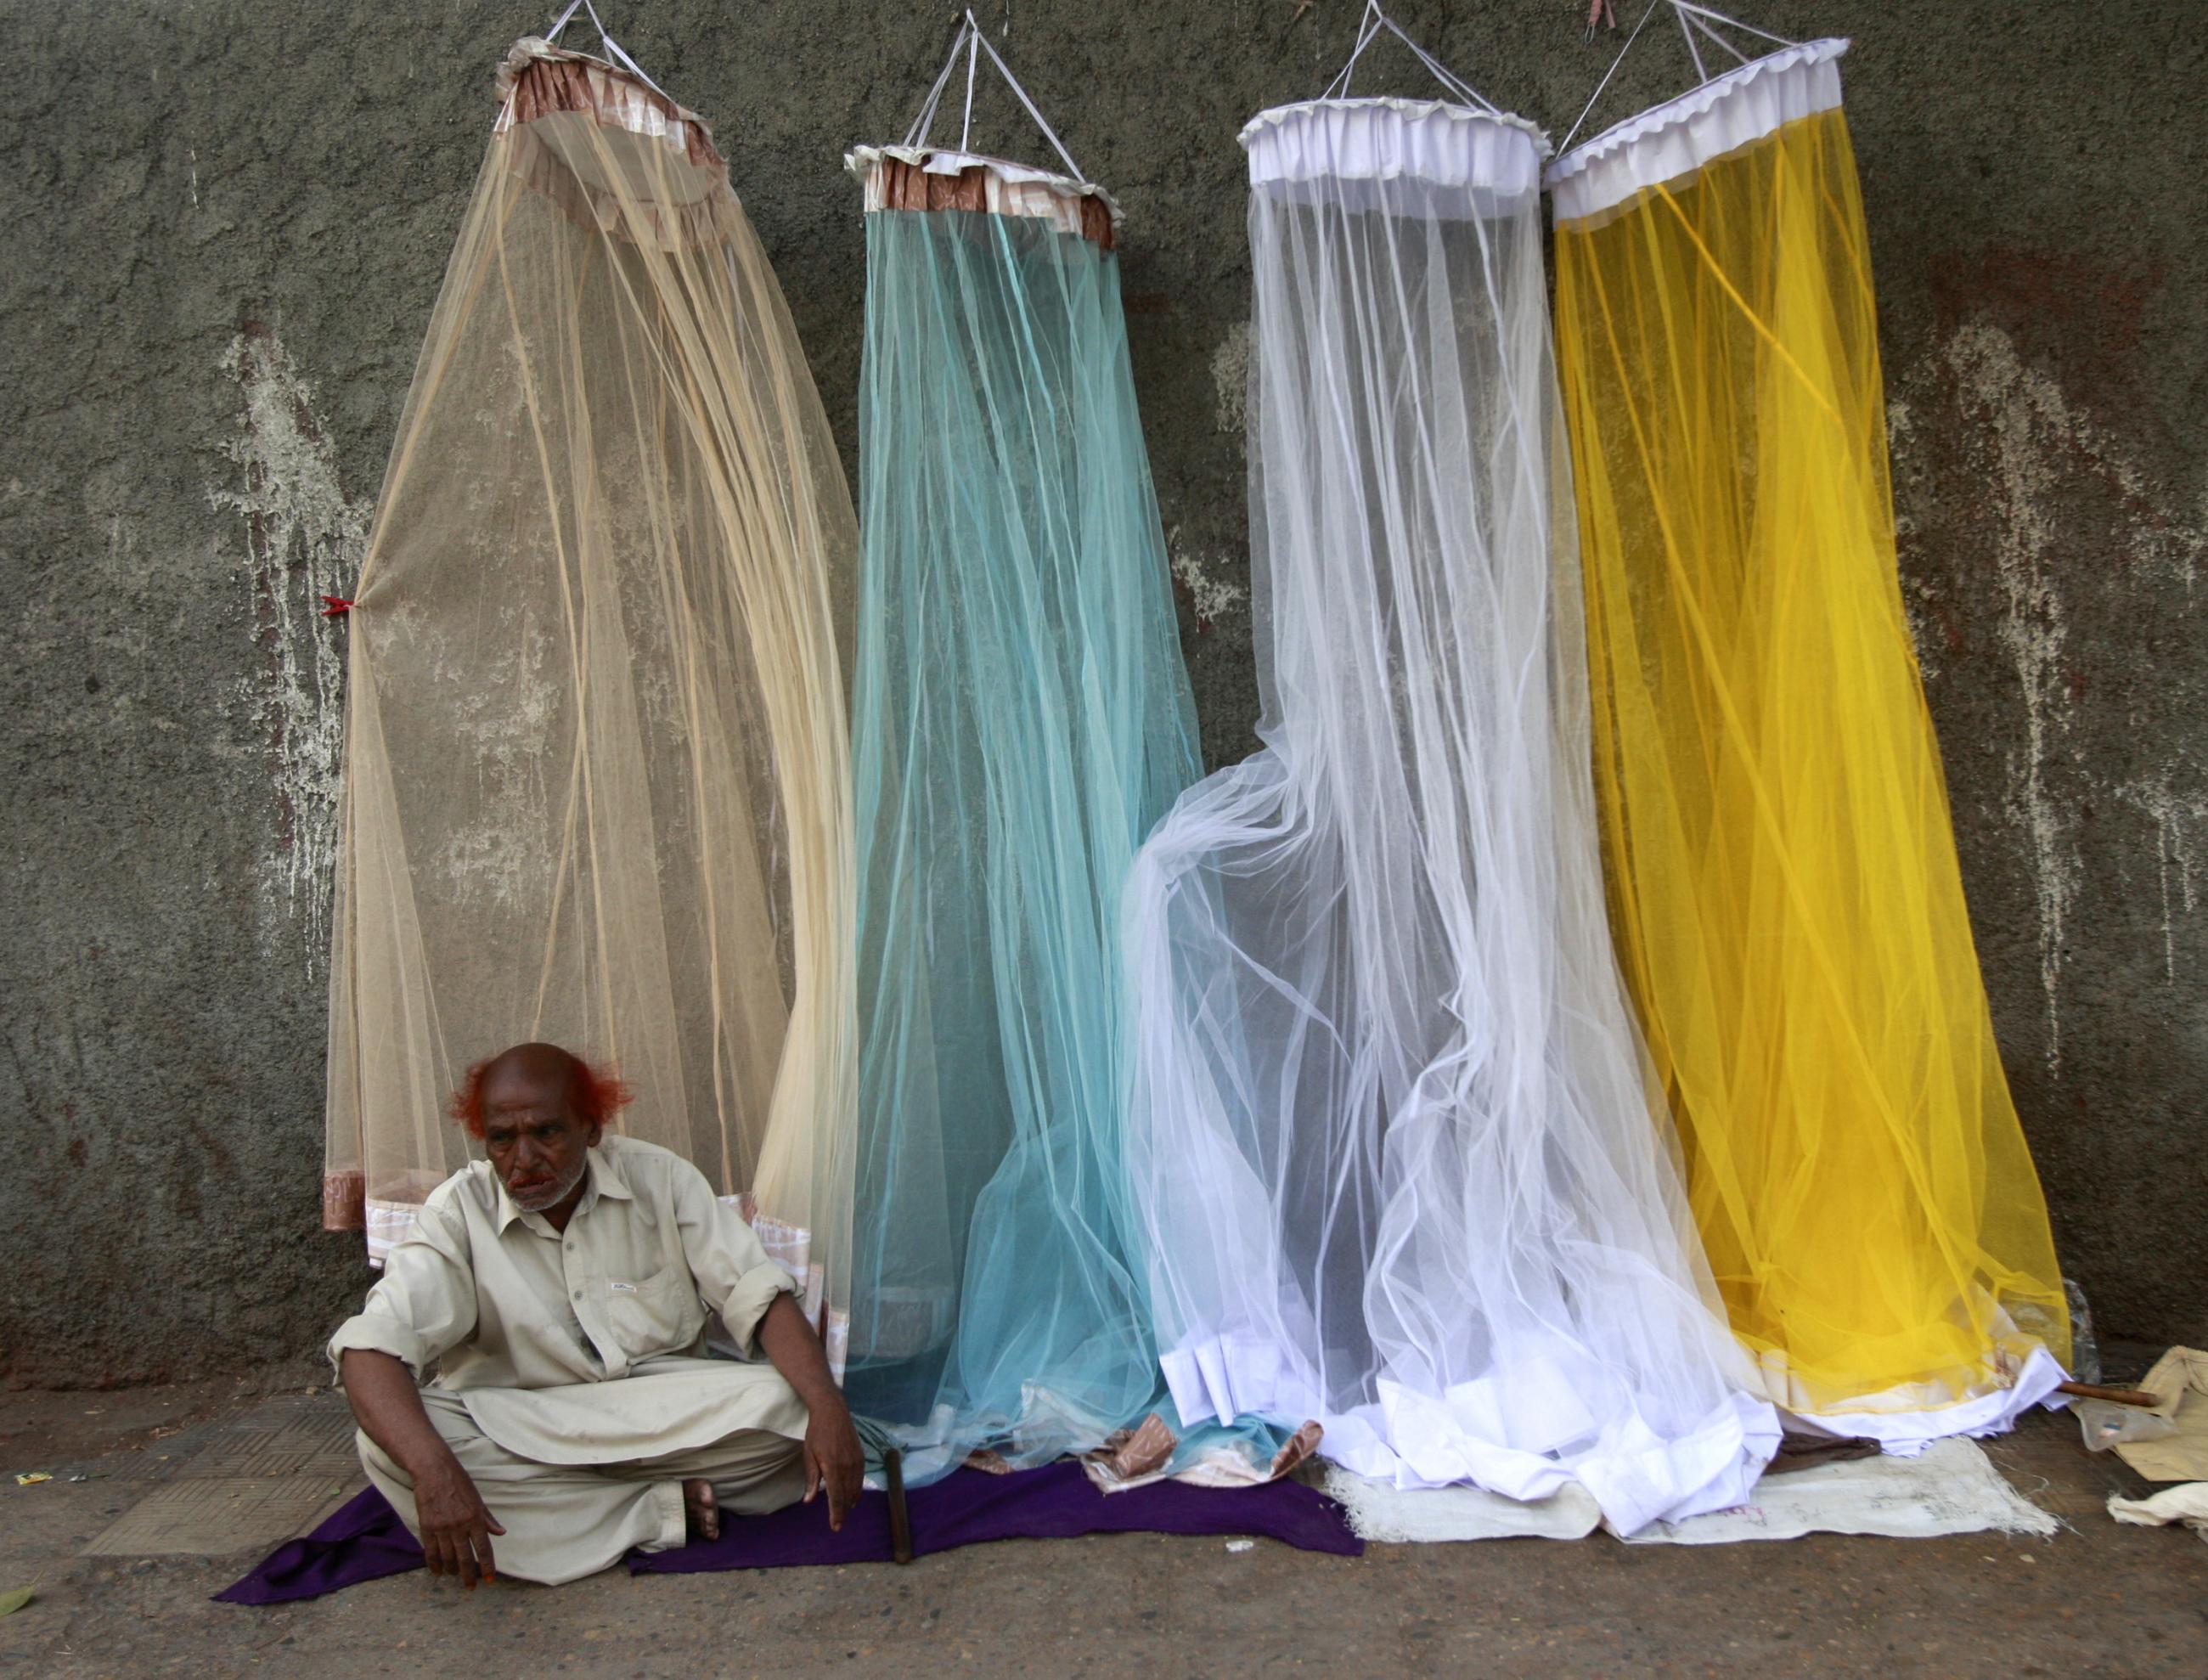 A man sells mosquito nets for 300 PKR (about $4 USD) street-side in Karachi, Pakistan on May 19, 2009.